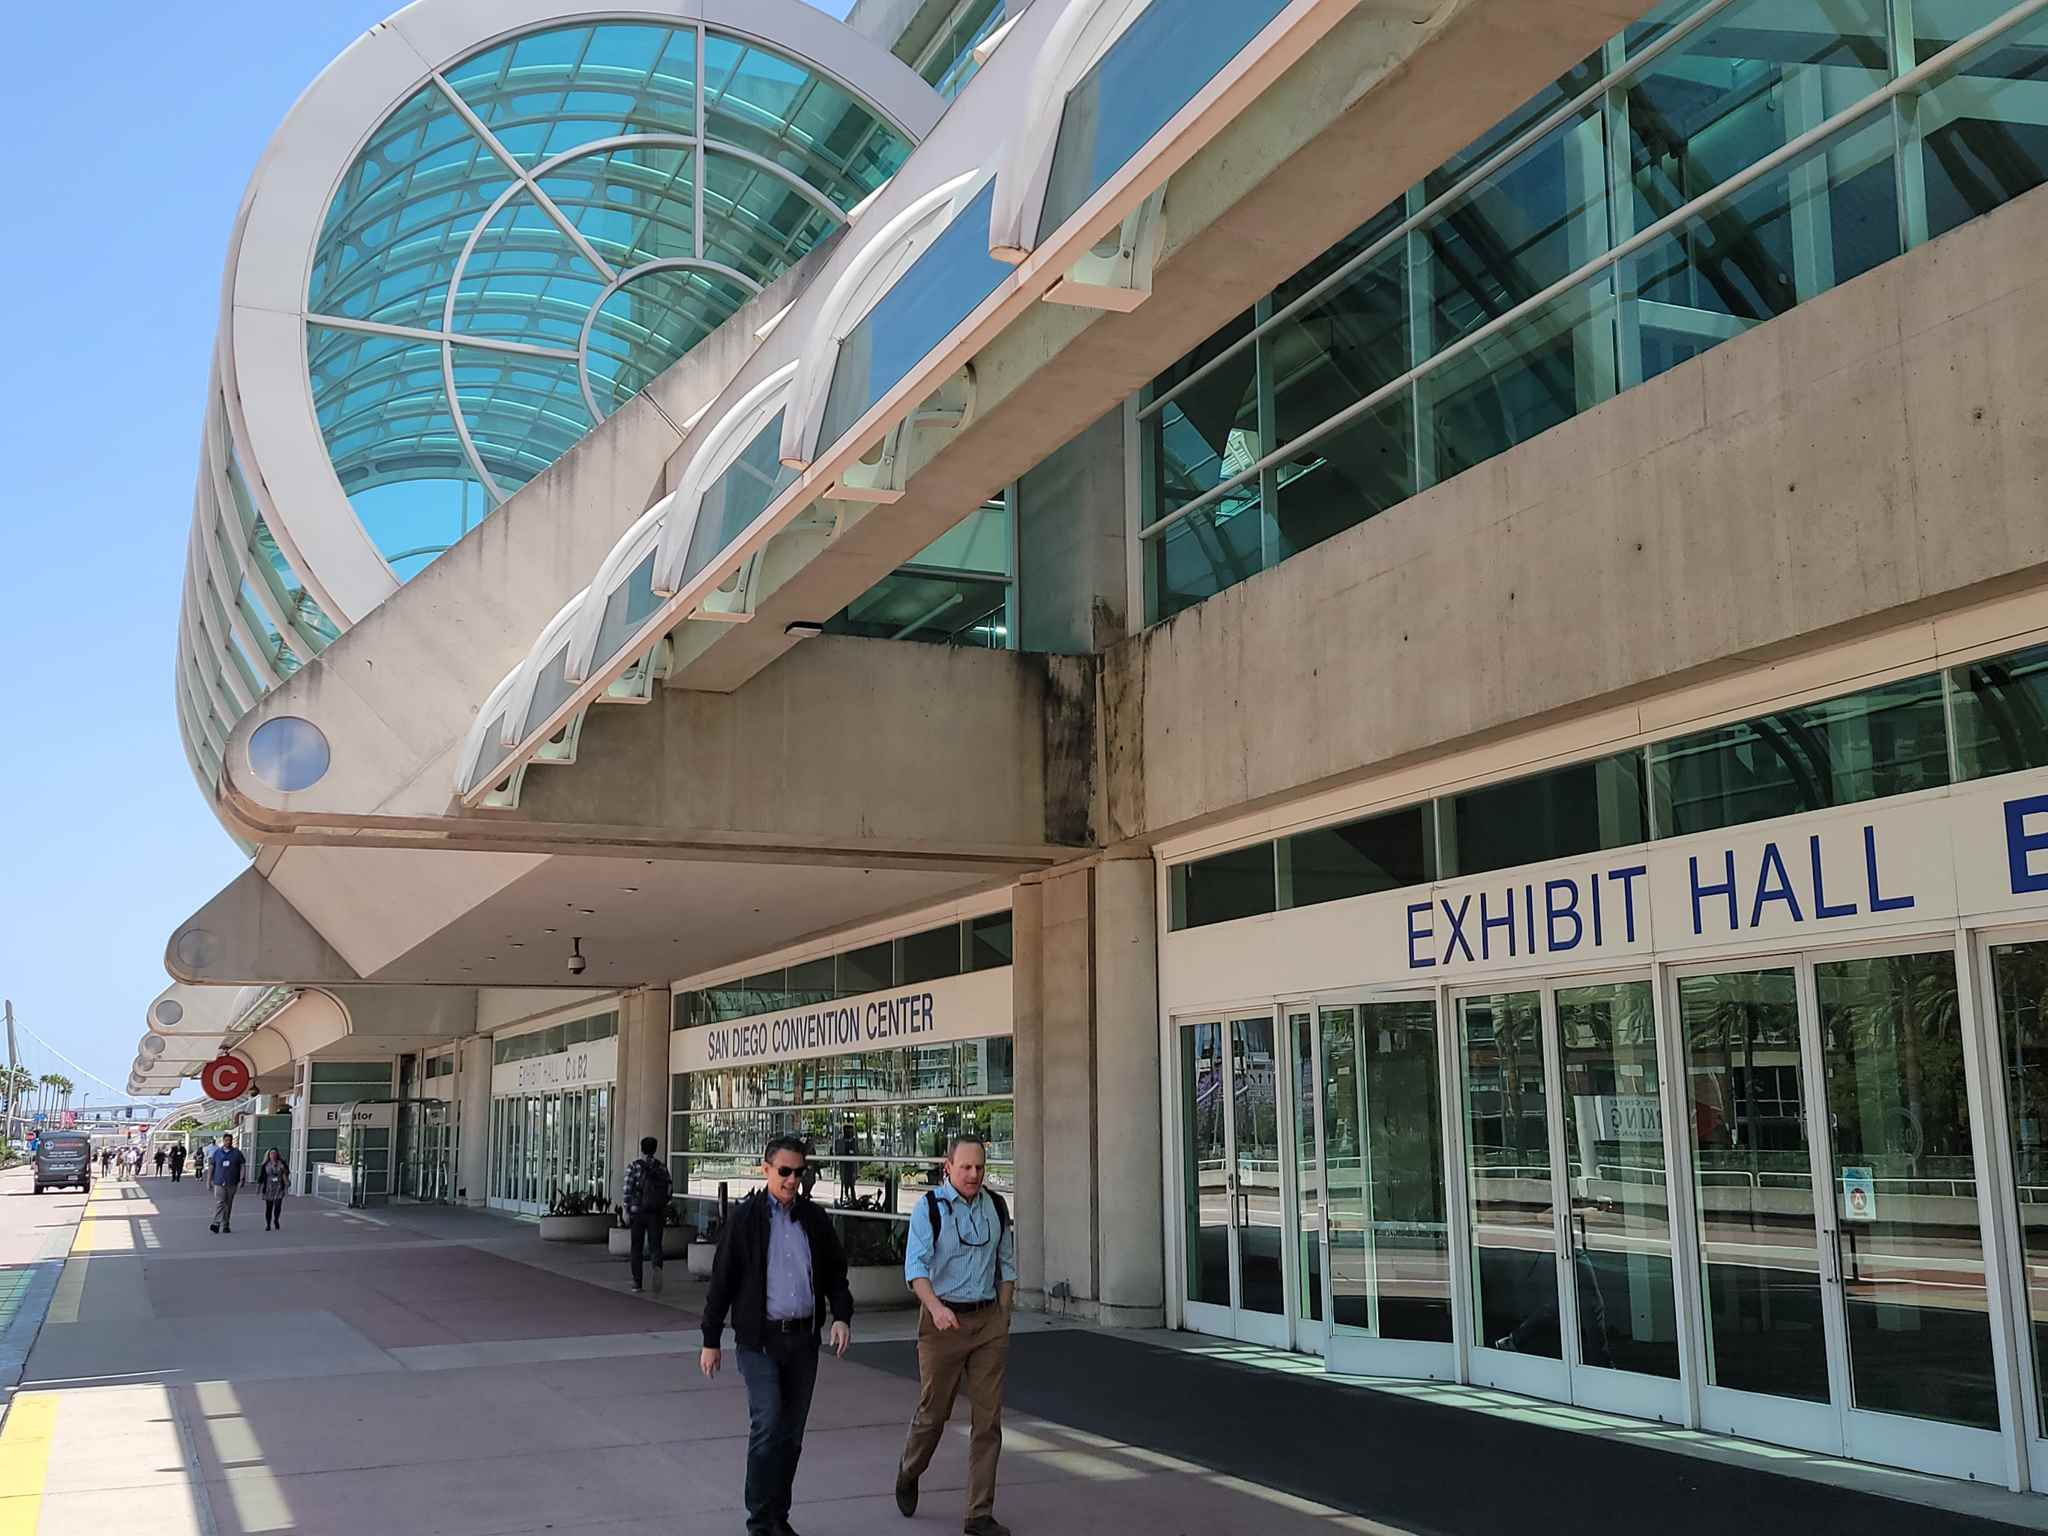 Starting at the San Diego Convention Center